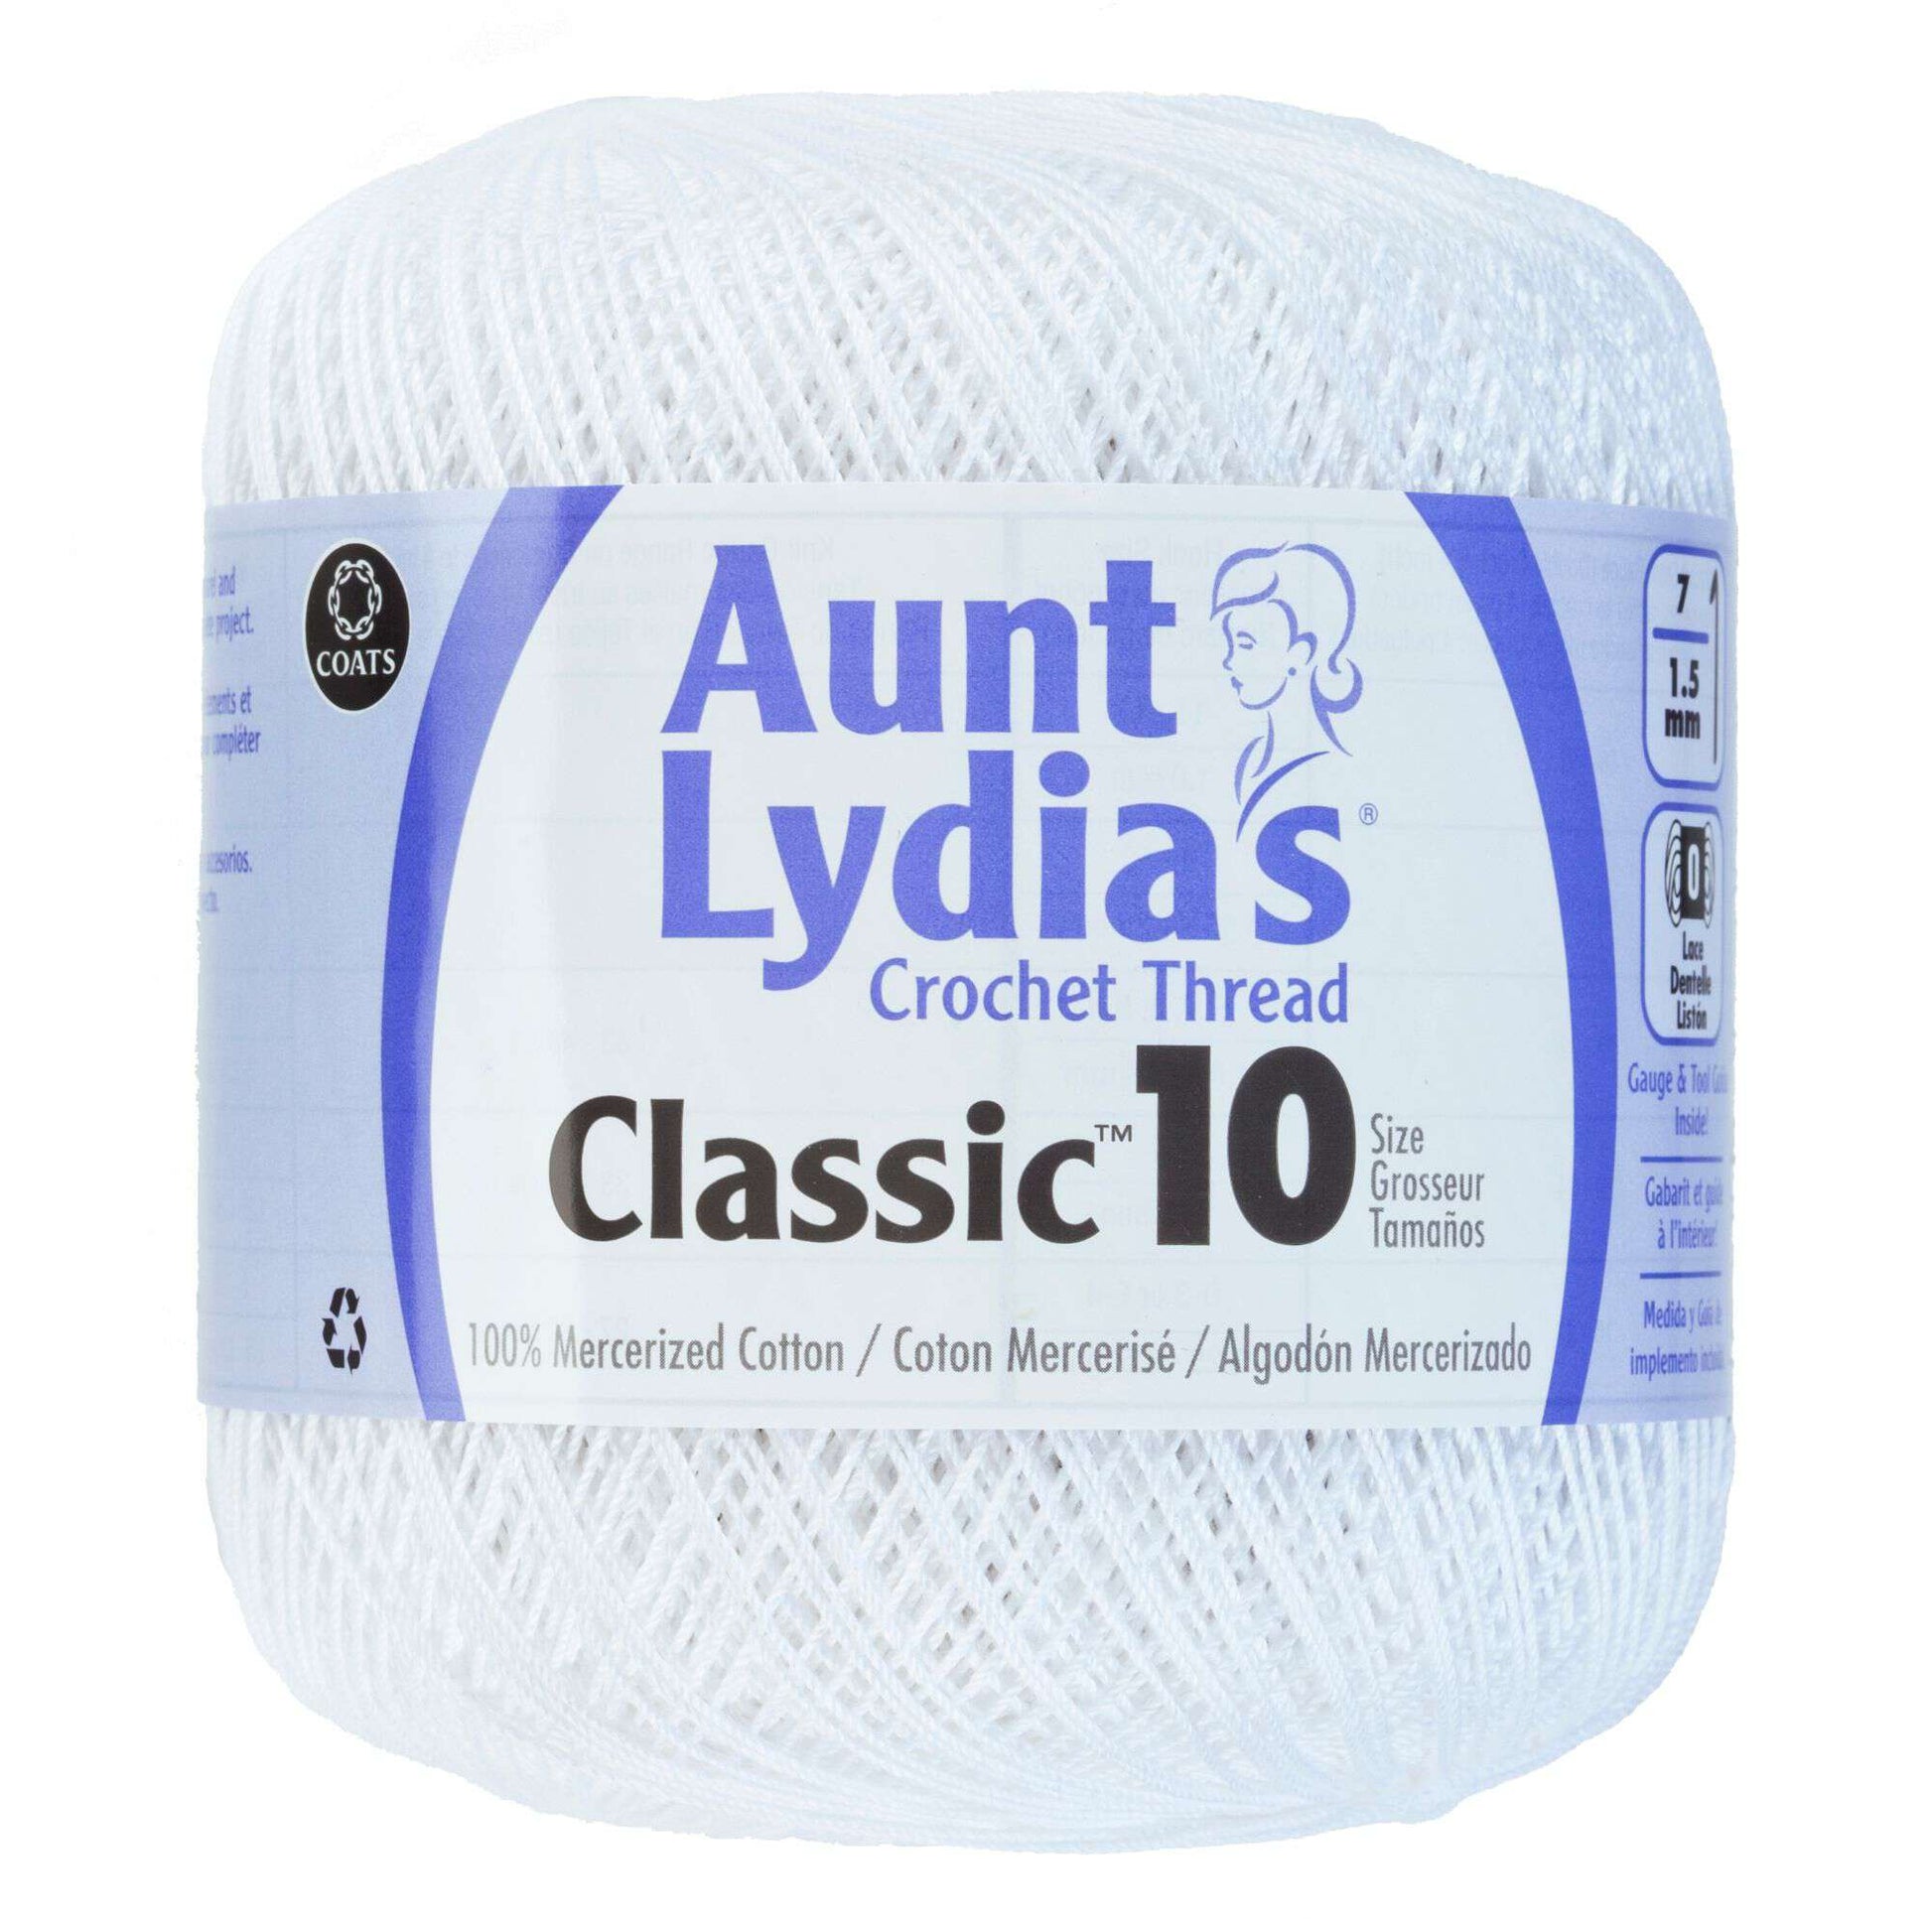 Aunt Lydia's Classic Crochet Thread Size 10 - Clearance shades White